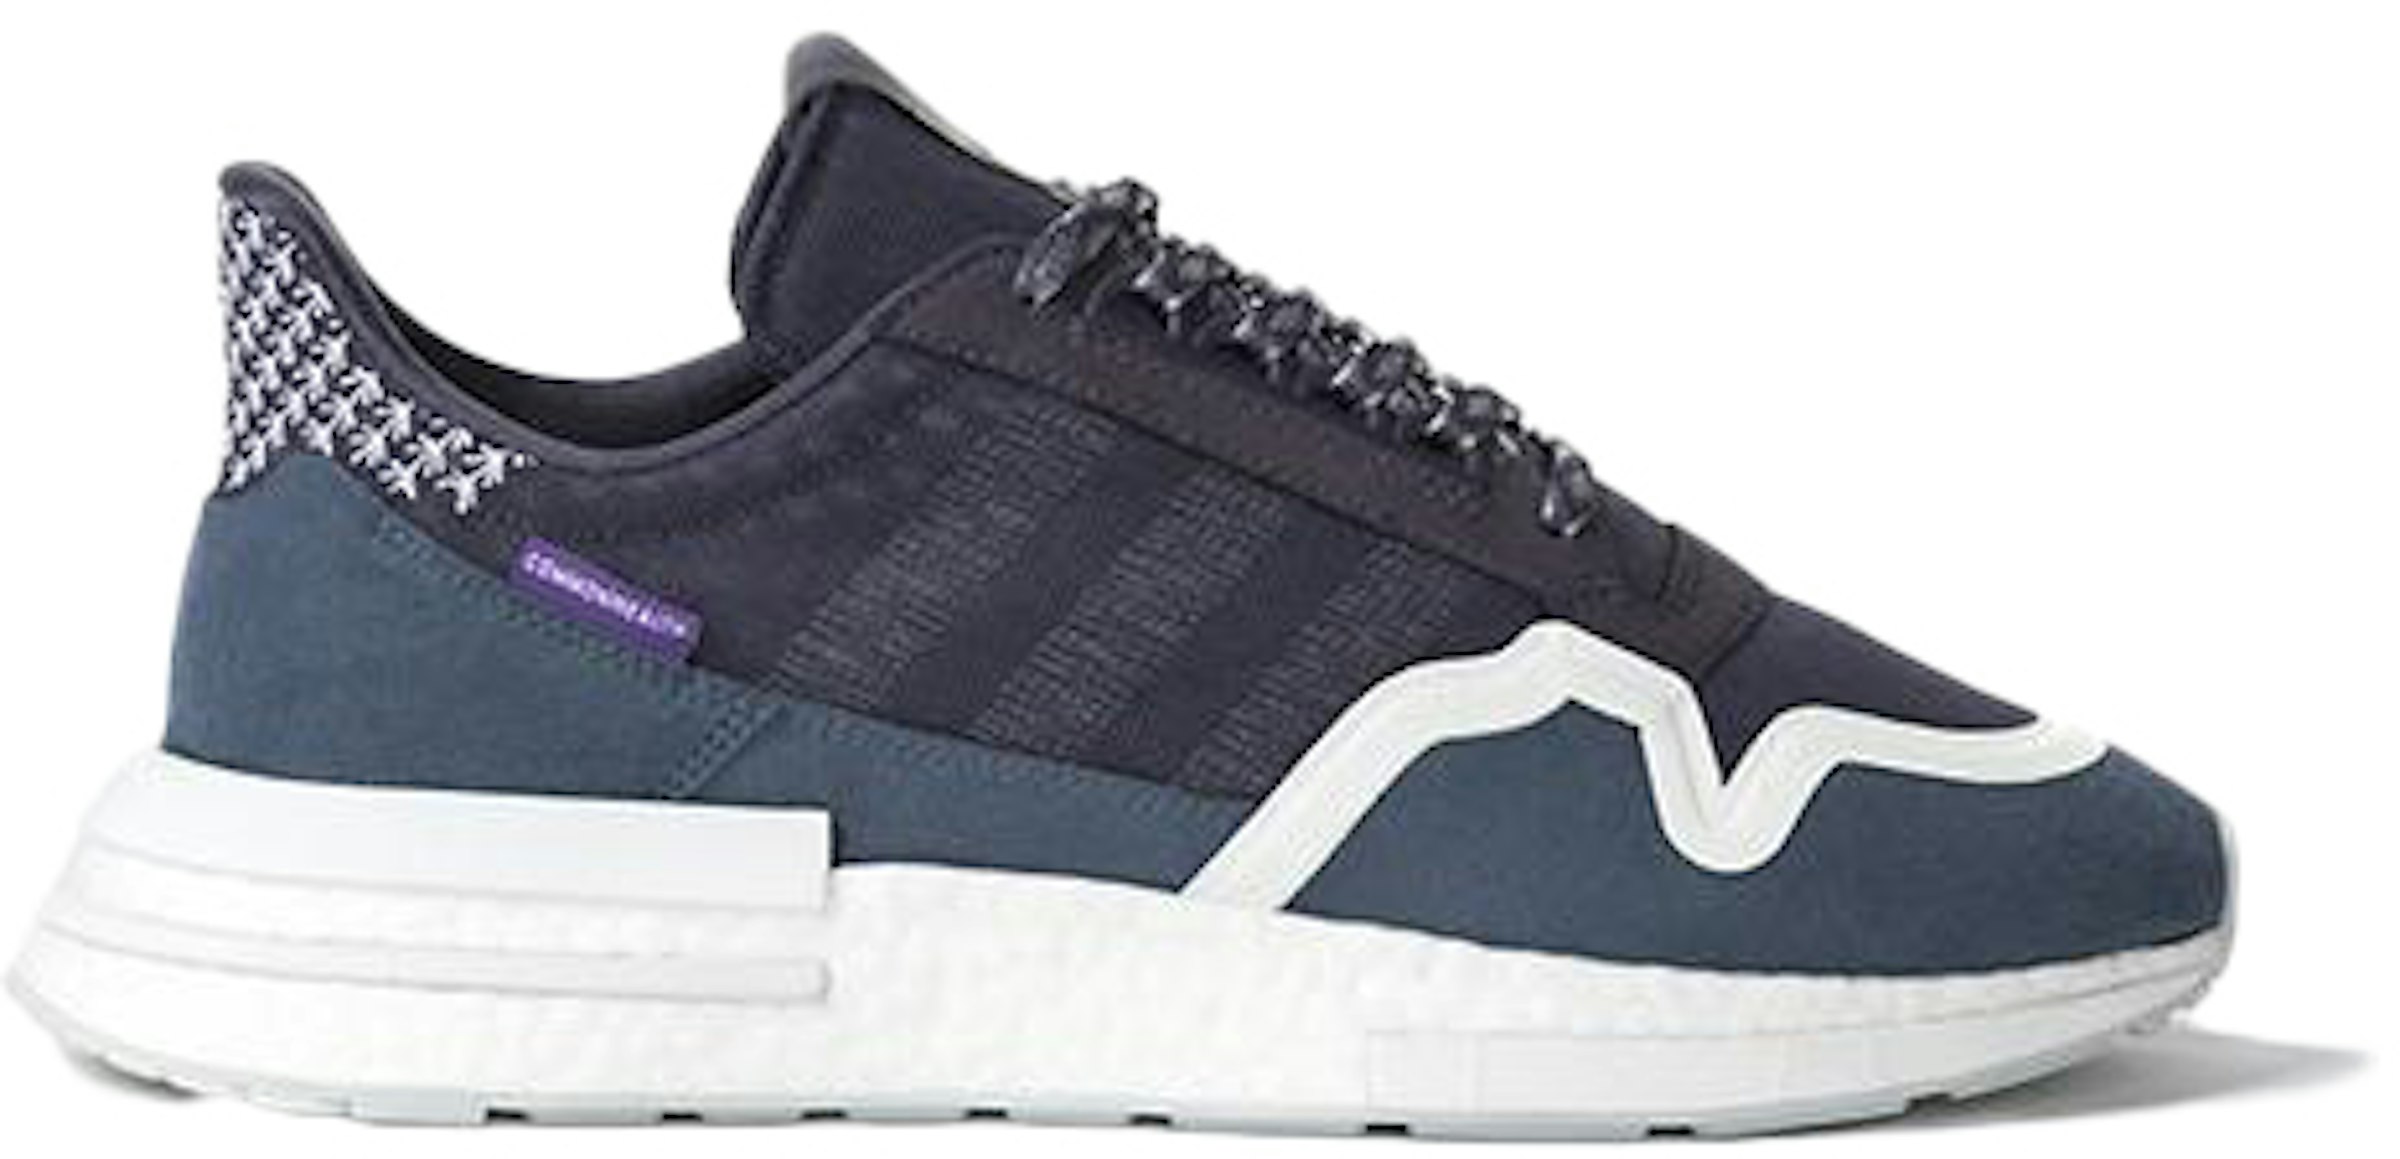 ZX 500 RM Commonwealth FNF - US